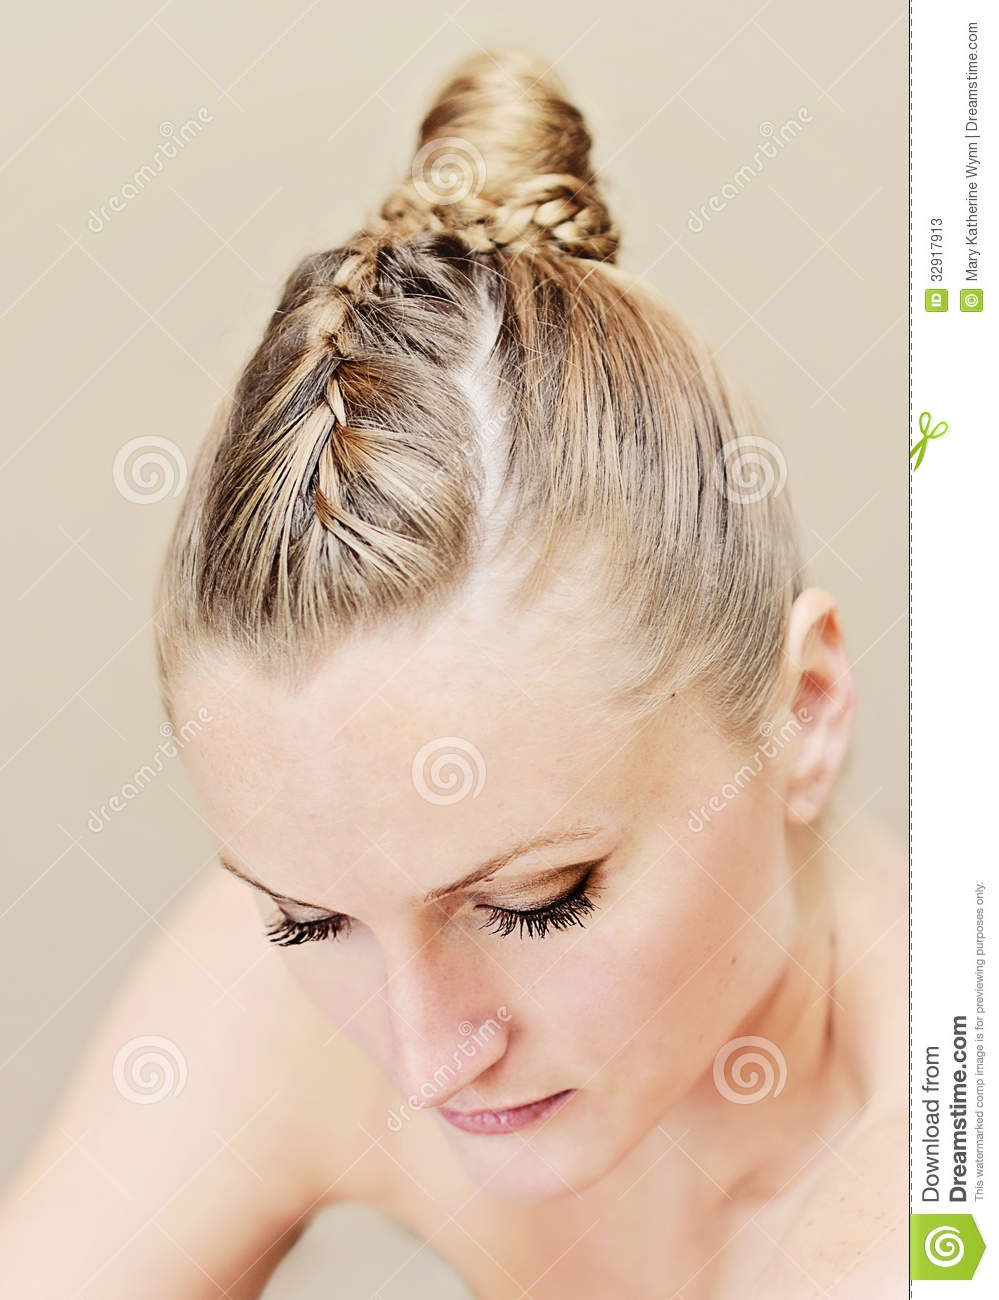 Woman With Updo Hairstyle Stock Photos   Image  32917913